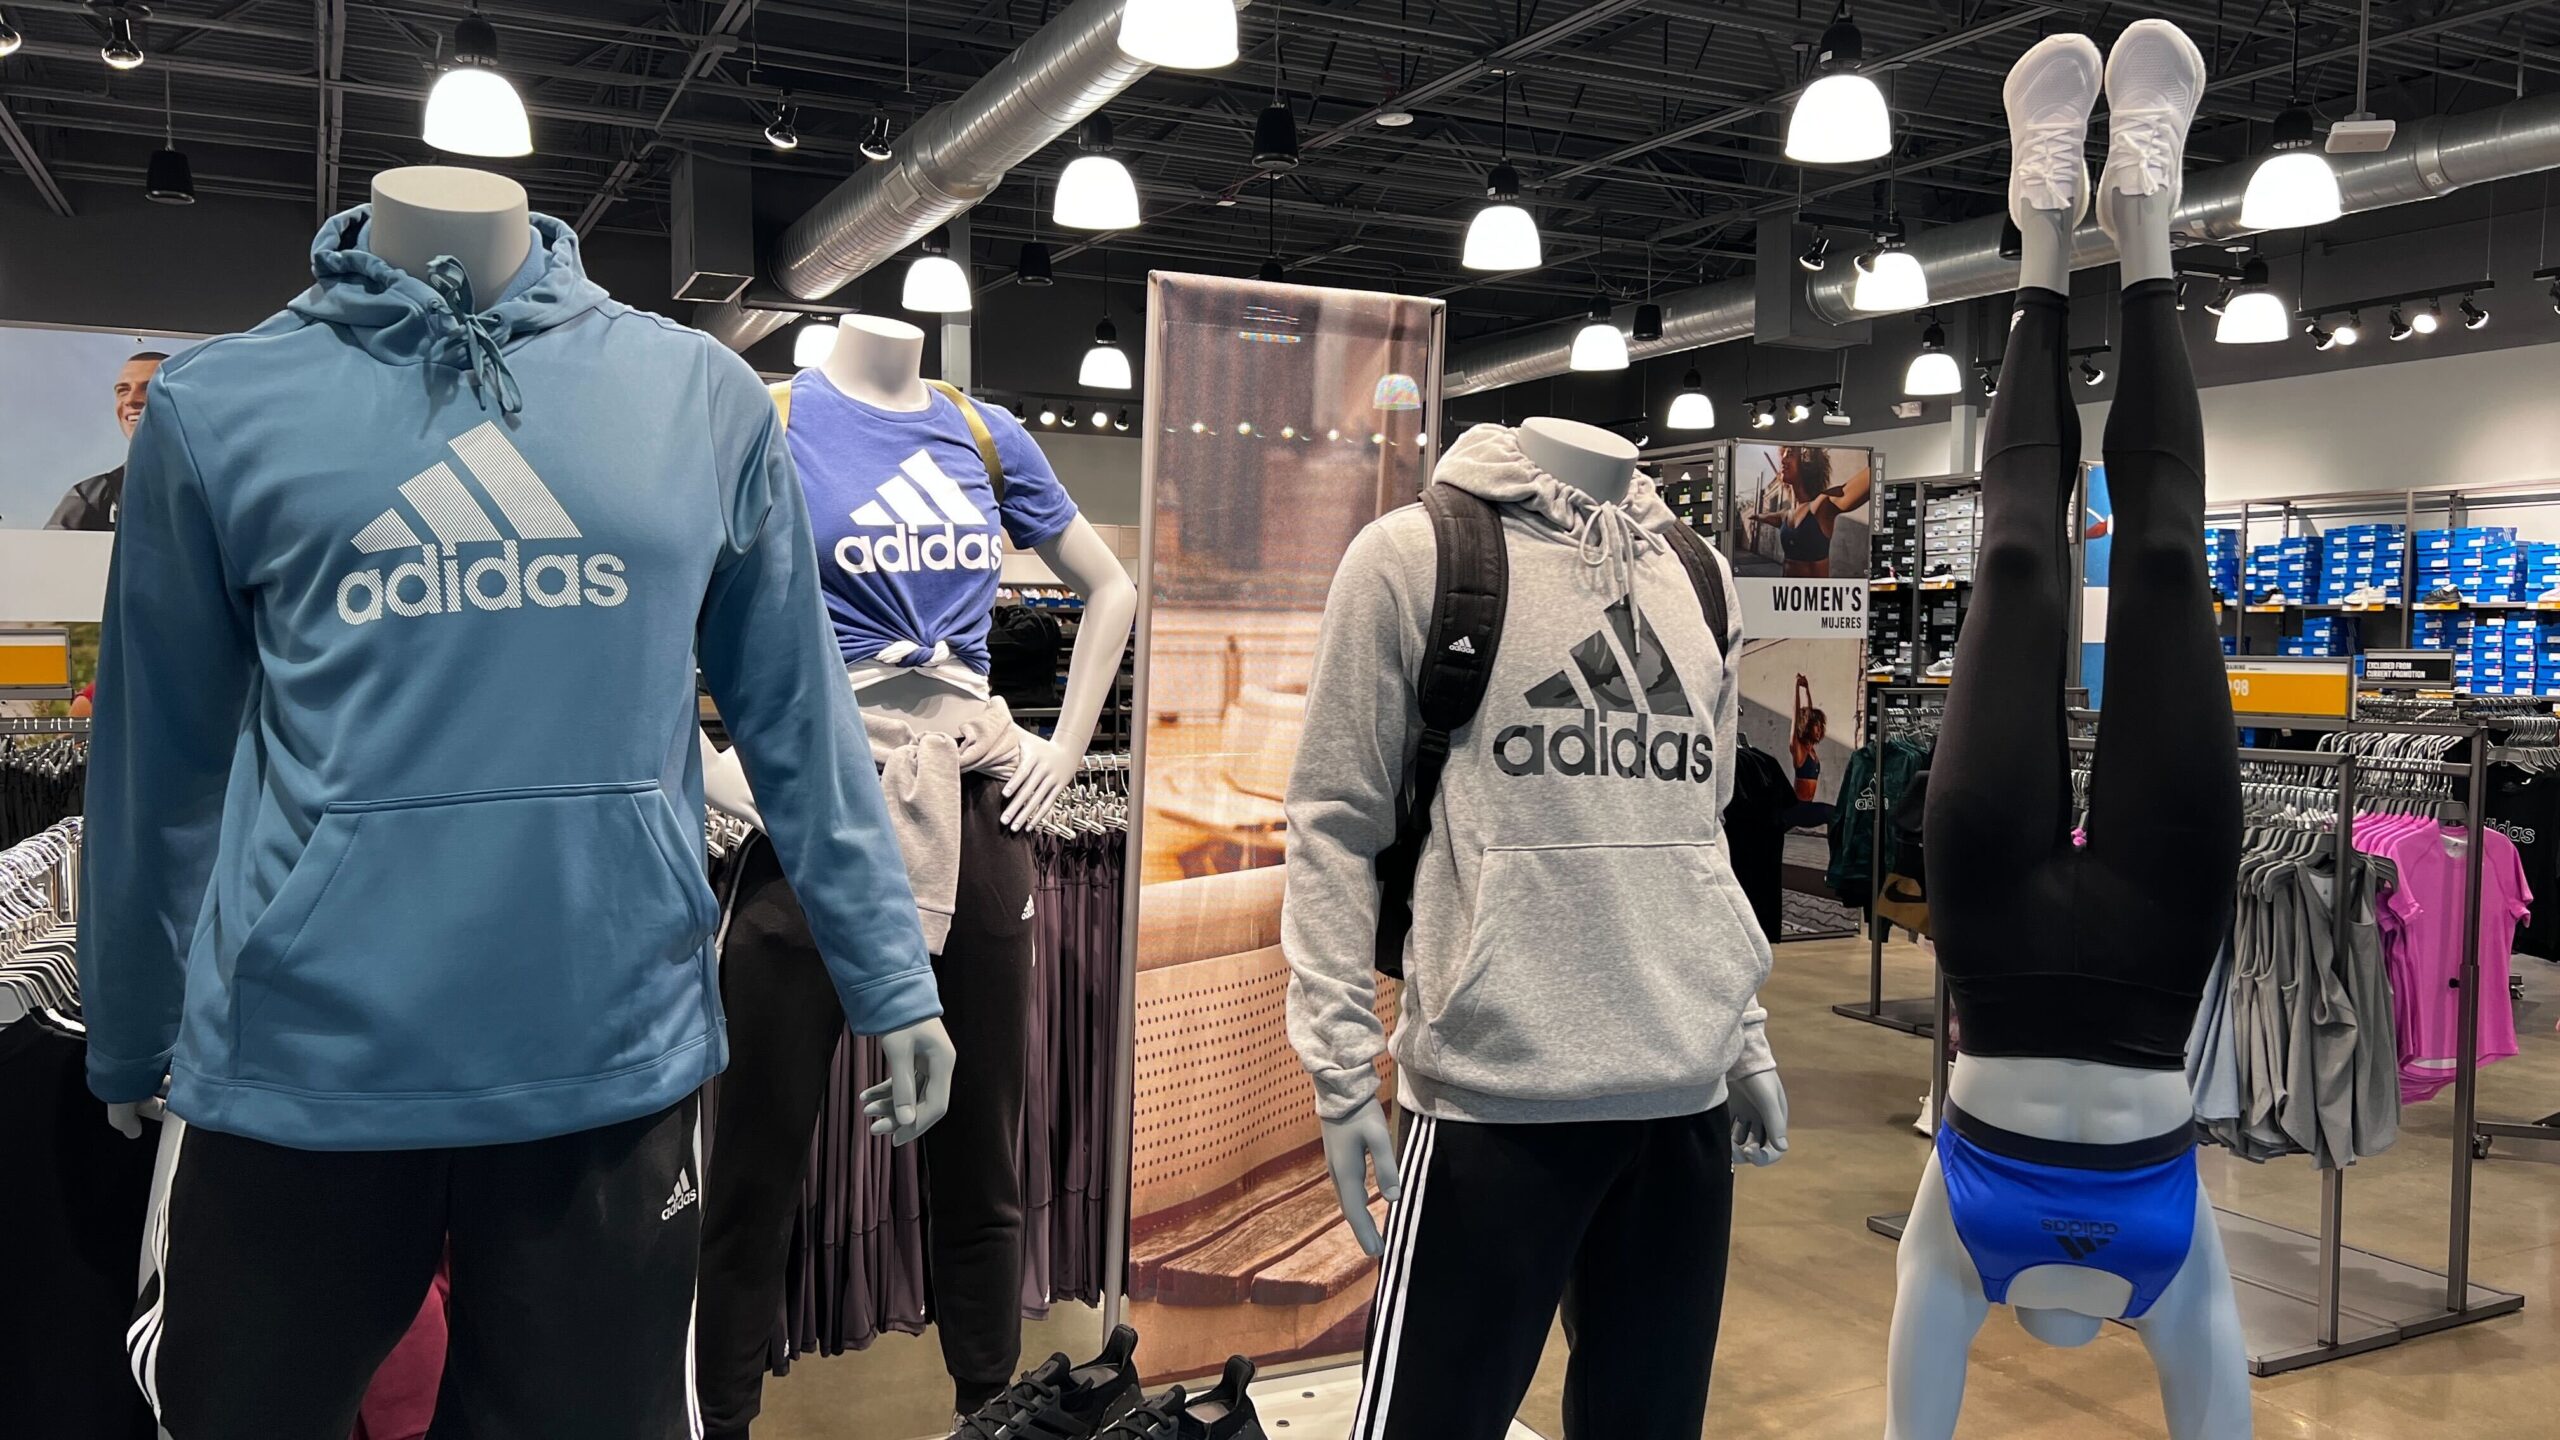 Shop Premium Outlets - Up to 60% Off Adidas + Extra 40% Off Checkout - The Freebie Guy®